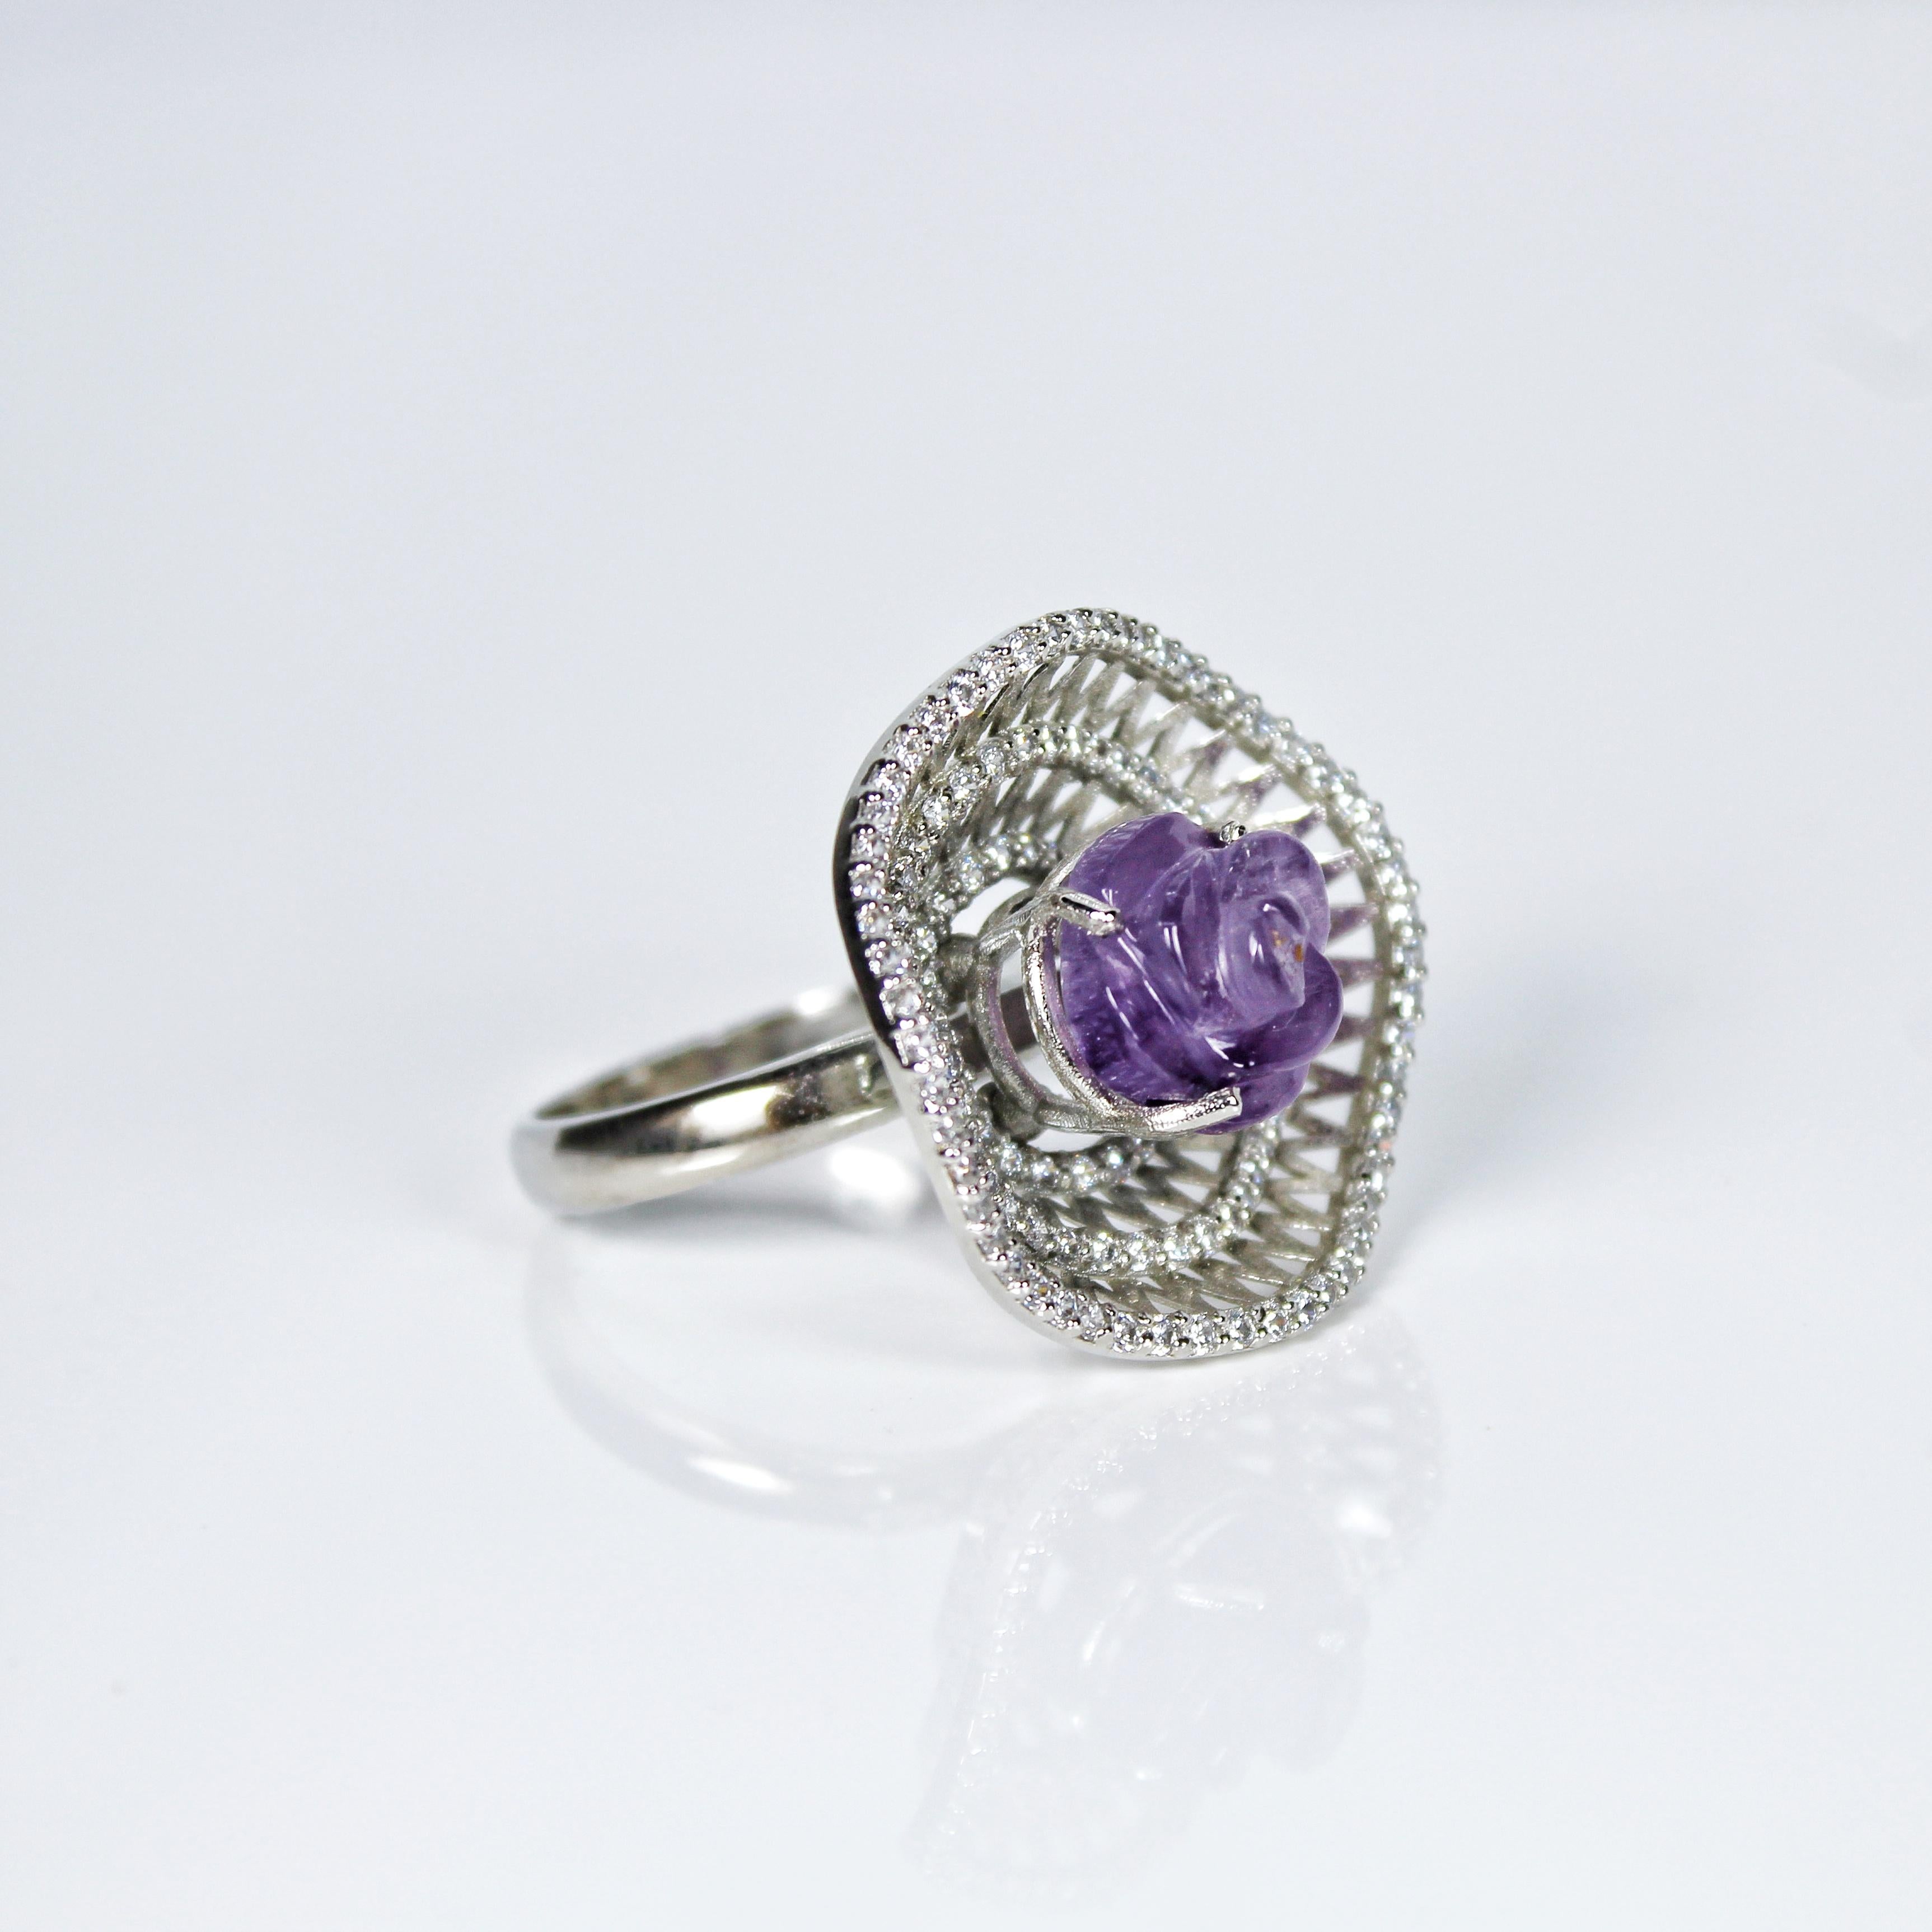 Metal - Silver
Indian ring size - 17
Product gross Weight - 8.450 Grams
Gemstone - Natural Amethyst
Total stone weight - 5.5 Carat
Stone shape - Rose
Stone size - 11 x 11 mm
Diamonds - Swarovski

The center of the cocktail ring is adorned with a